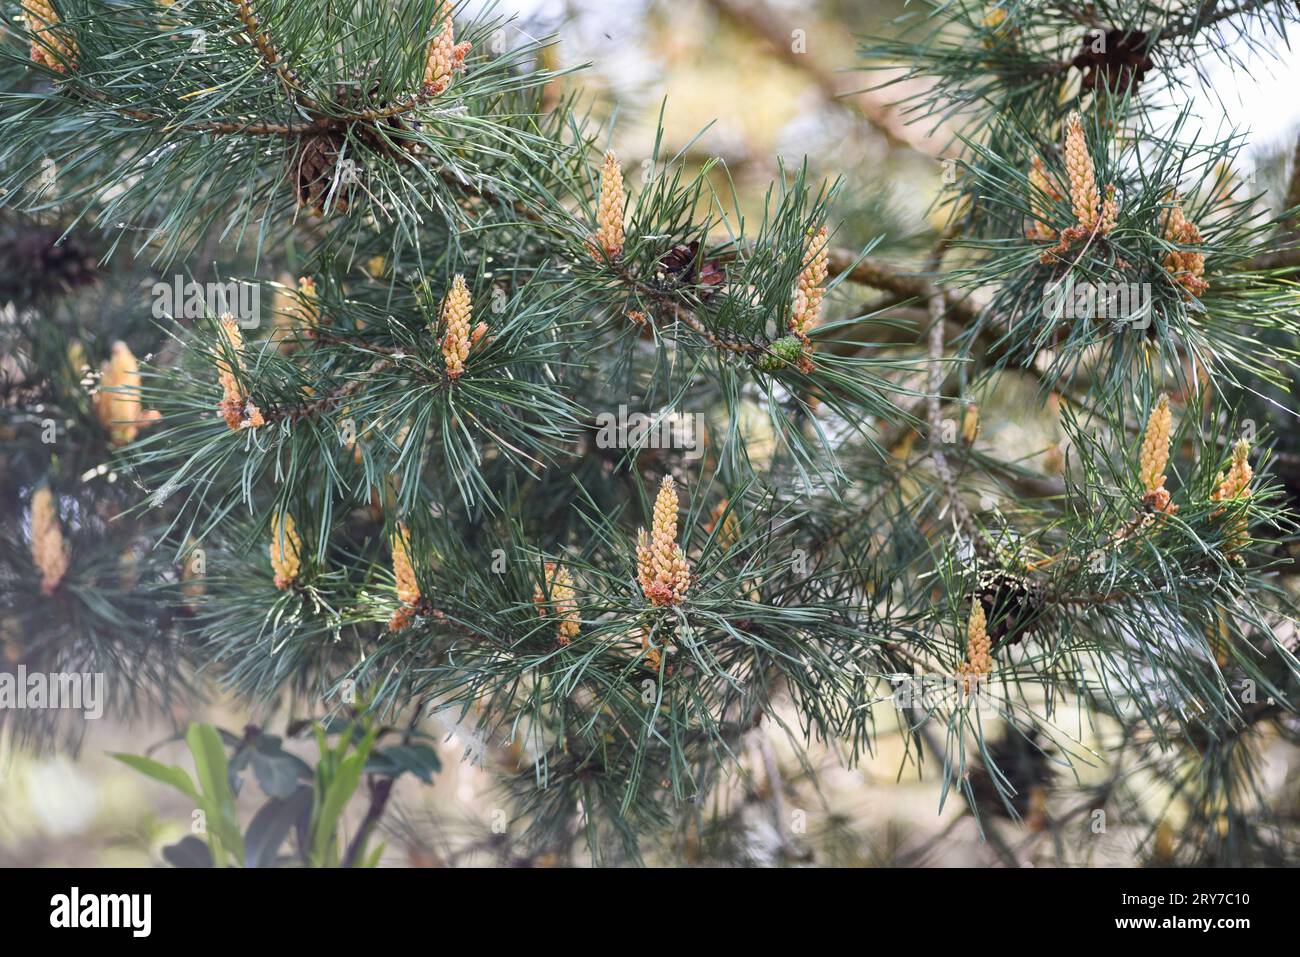 Pine flowers blooming in the garden in forest. Stock Photo